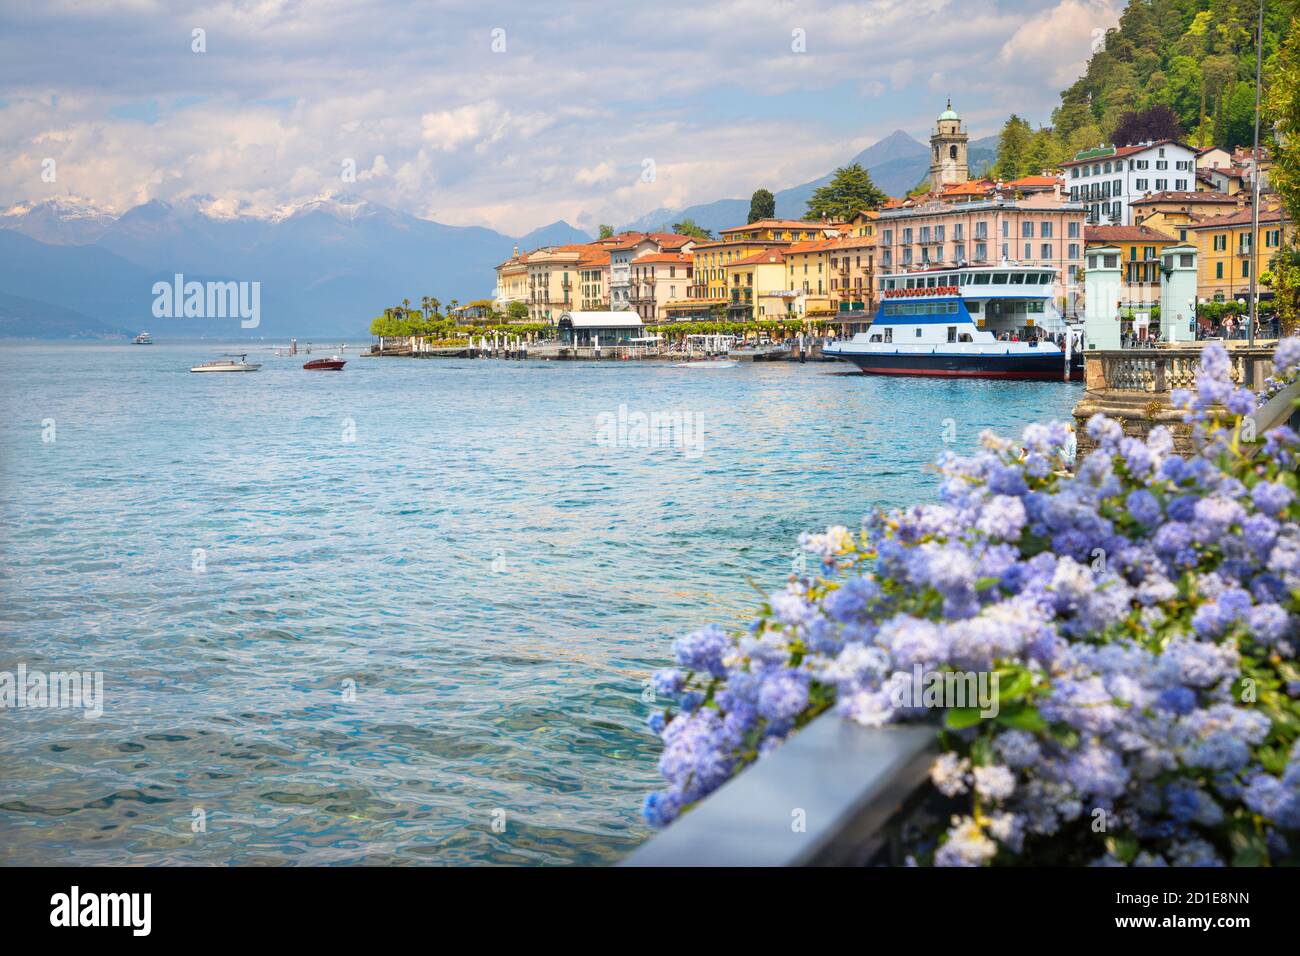 Bellagio - The promenade the town and the alps in the background. Stock Photo